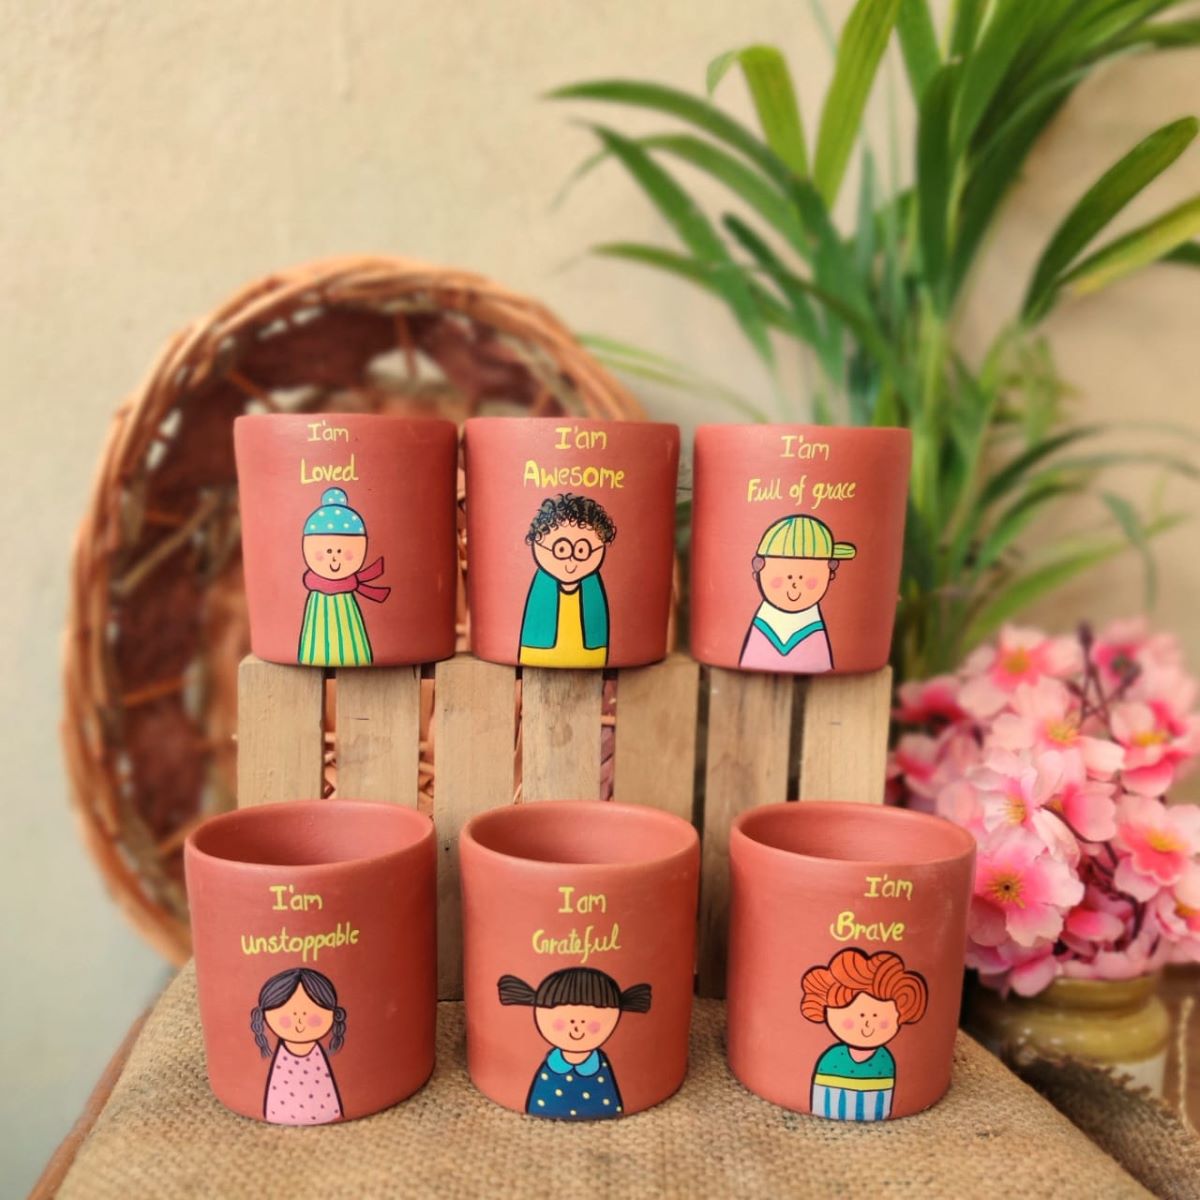 Handpainted Terracotta Planter Pots With Affirmations